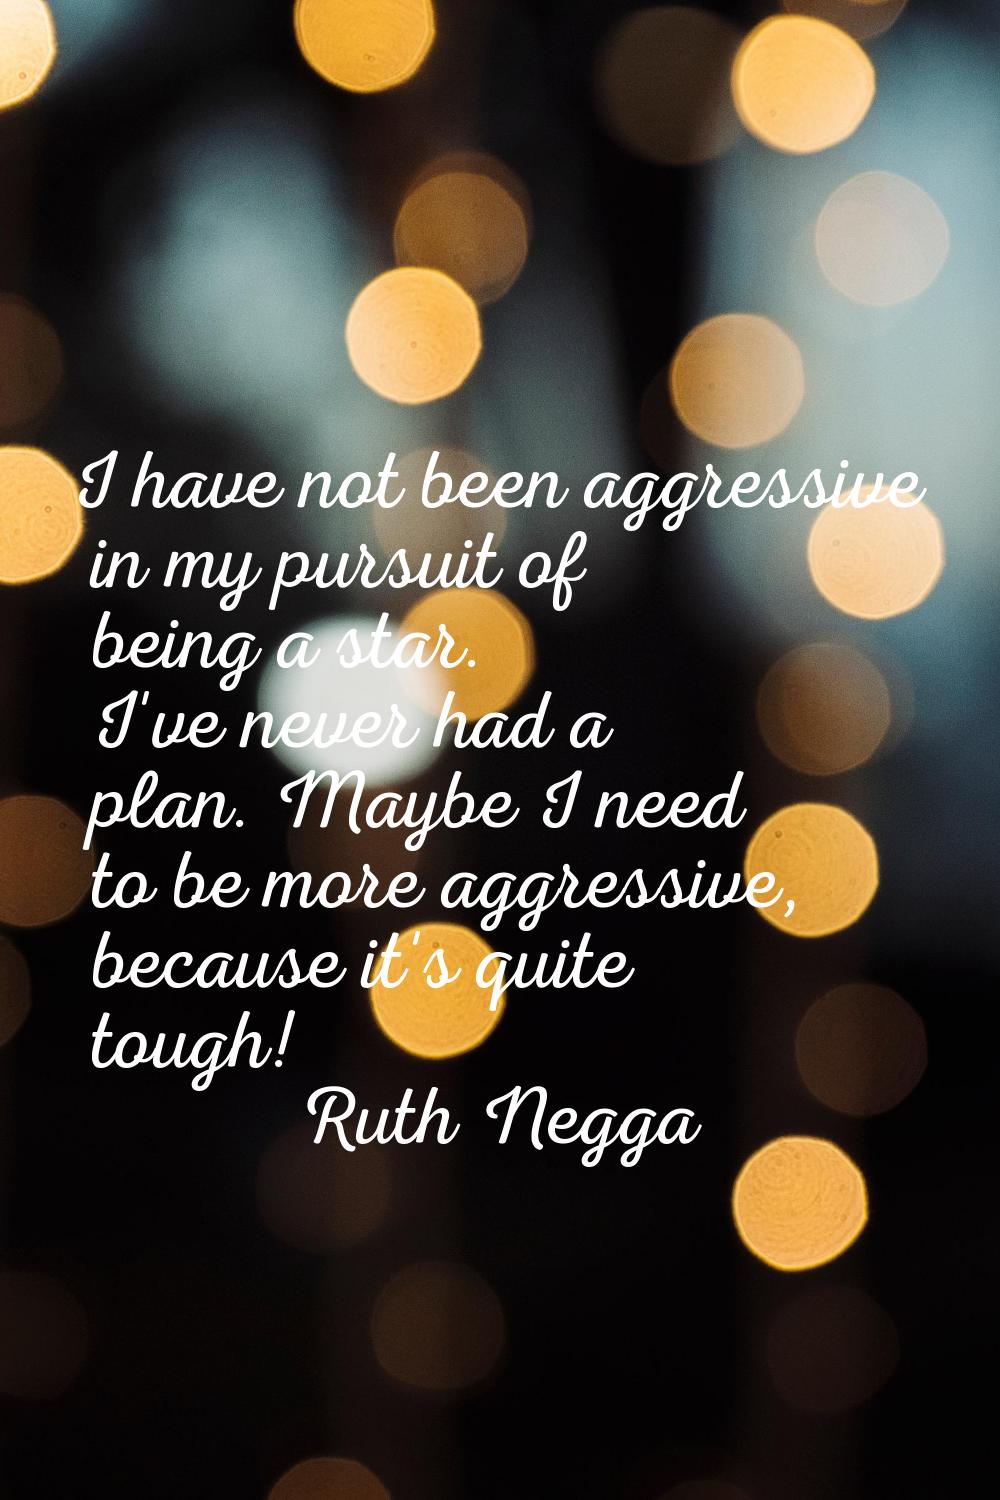 I have not been aggressive in my pursuit of being a star. I've never had a plan. Maybe I need to be